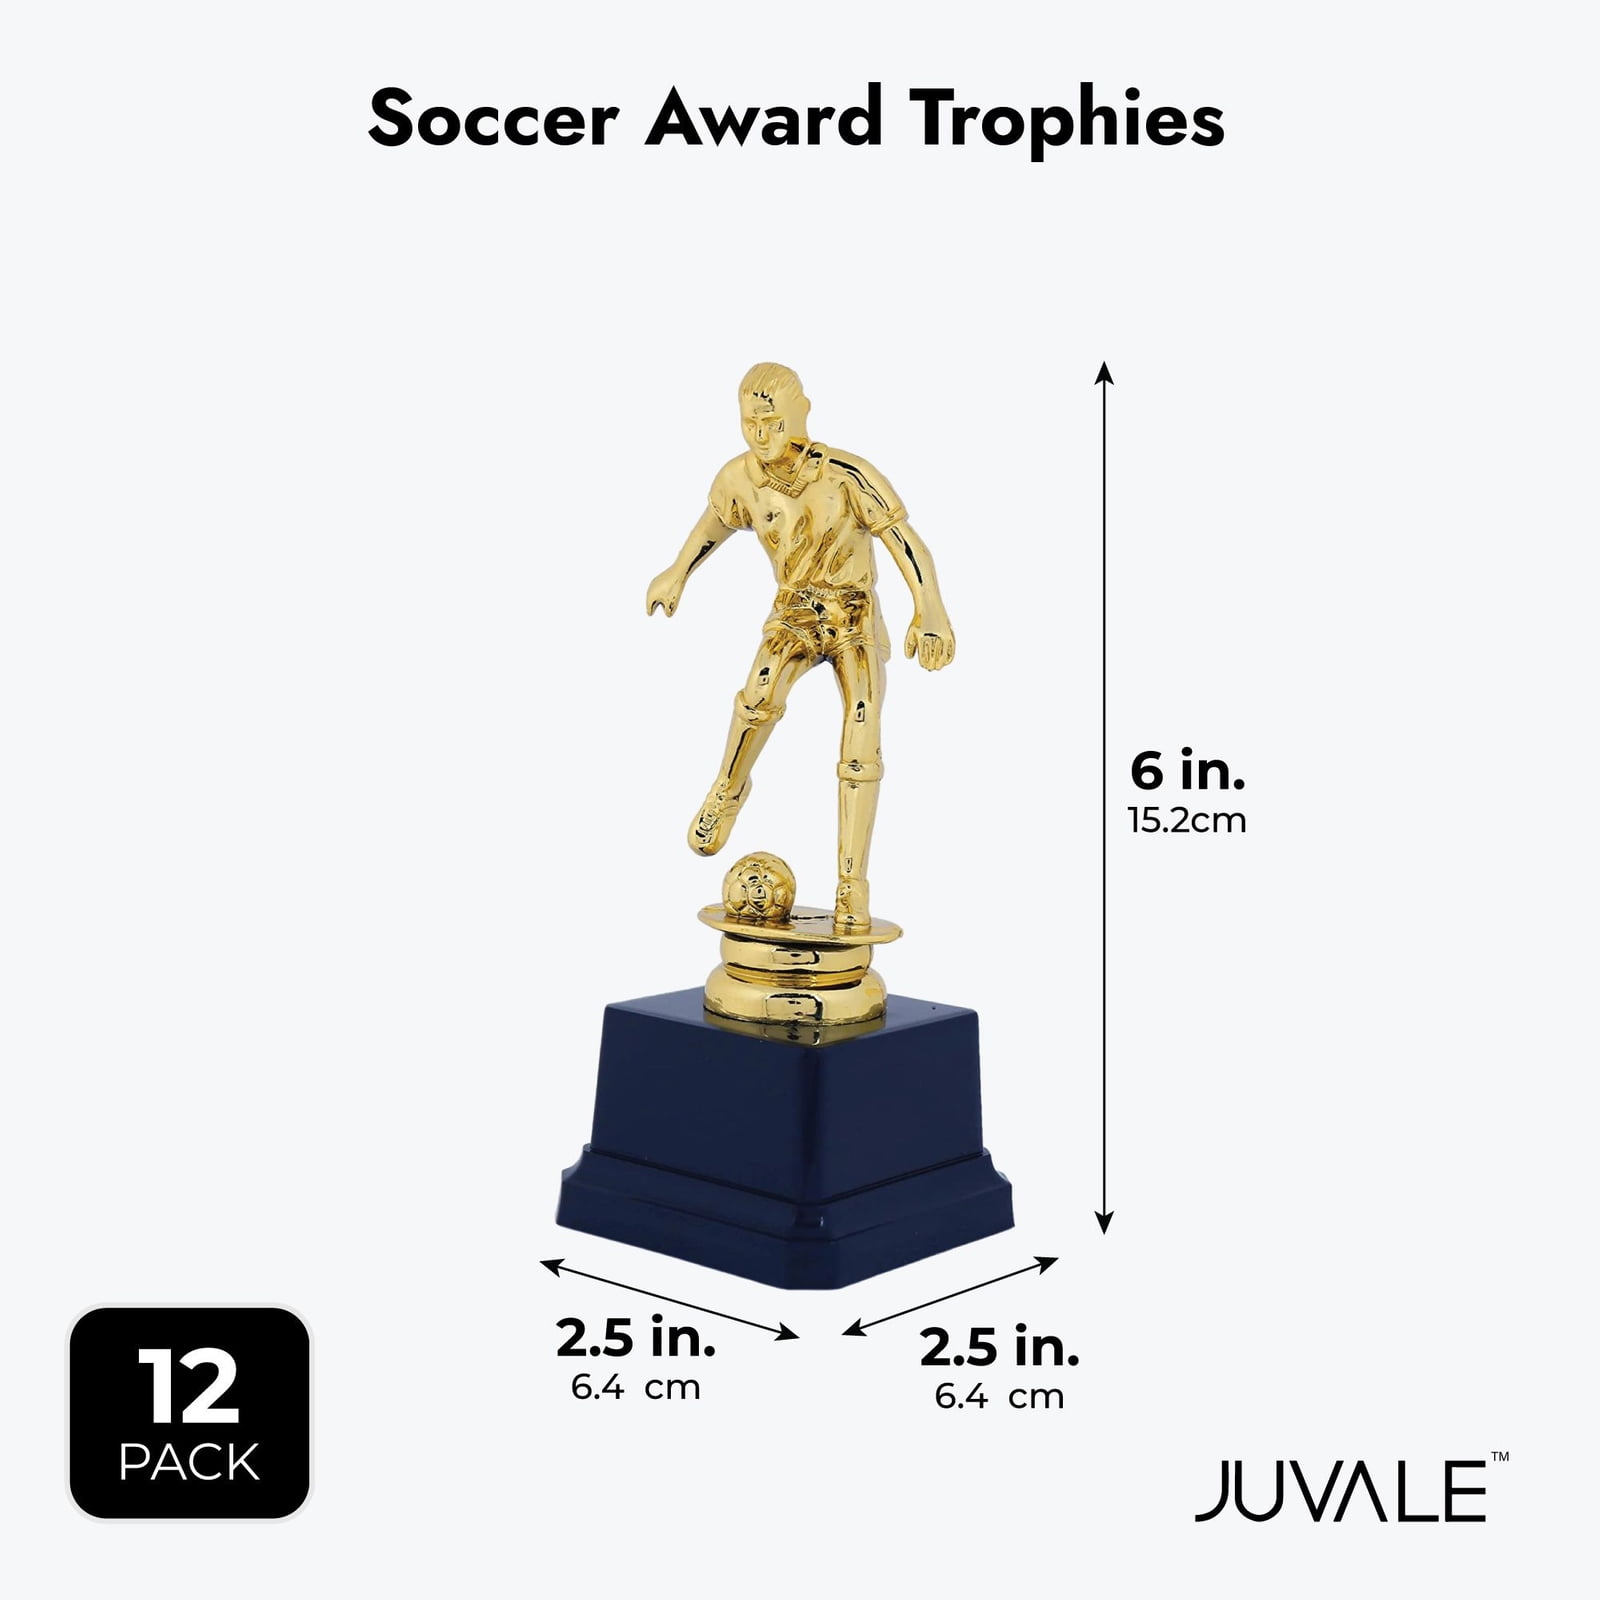 2.5 x 6 Inches Gold Competition Trophies Juvale Soccer Tournament Award Trophy 12 Pack